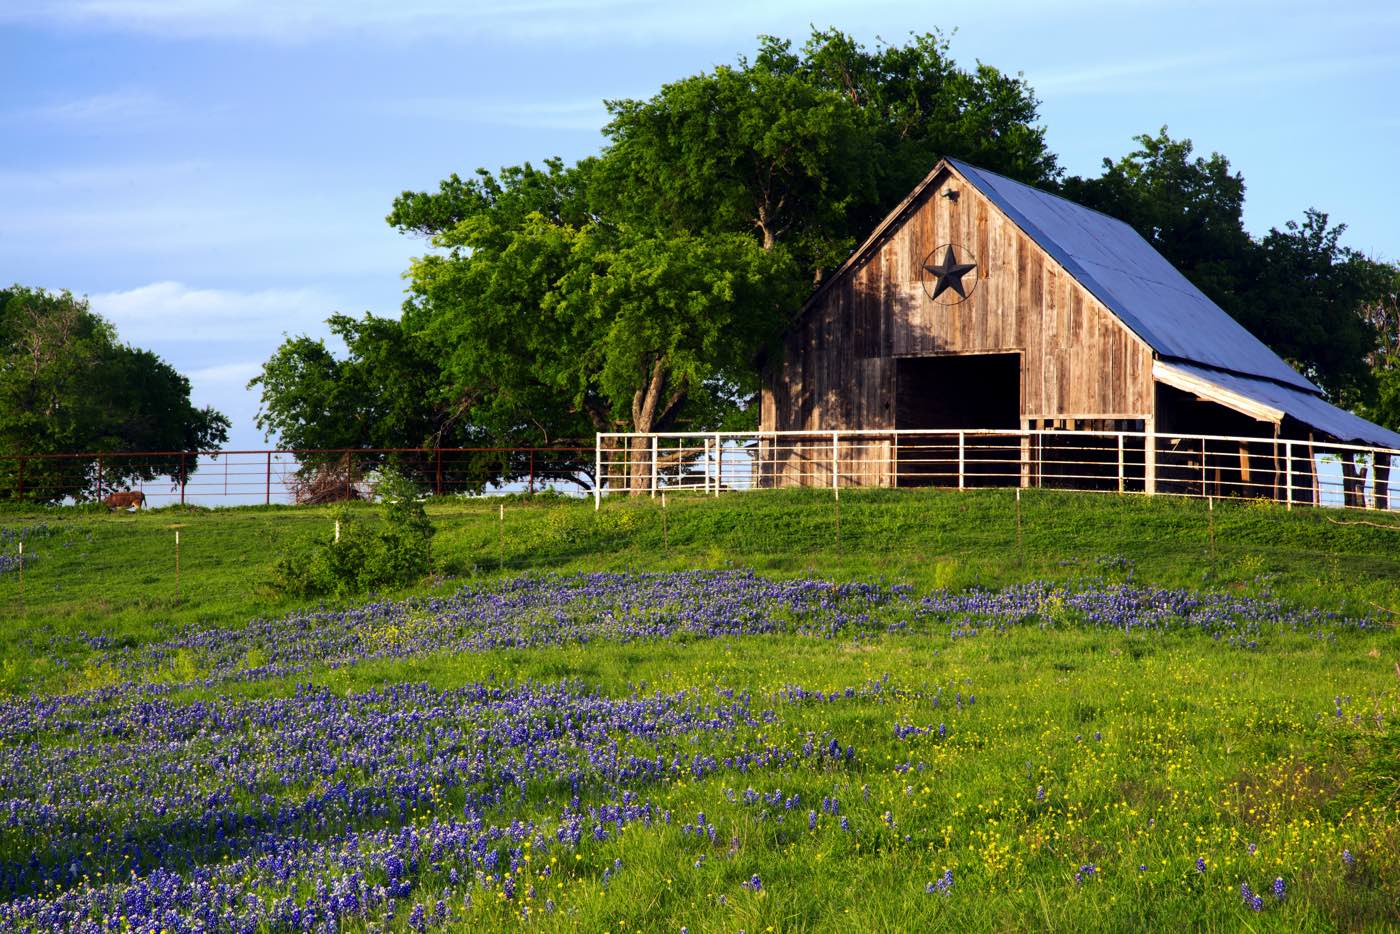 26 Best Small Towns in Texas You’ve Got To Visit